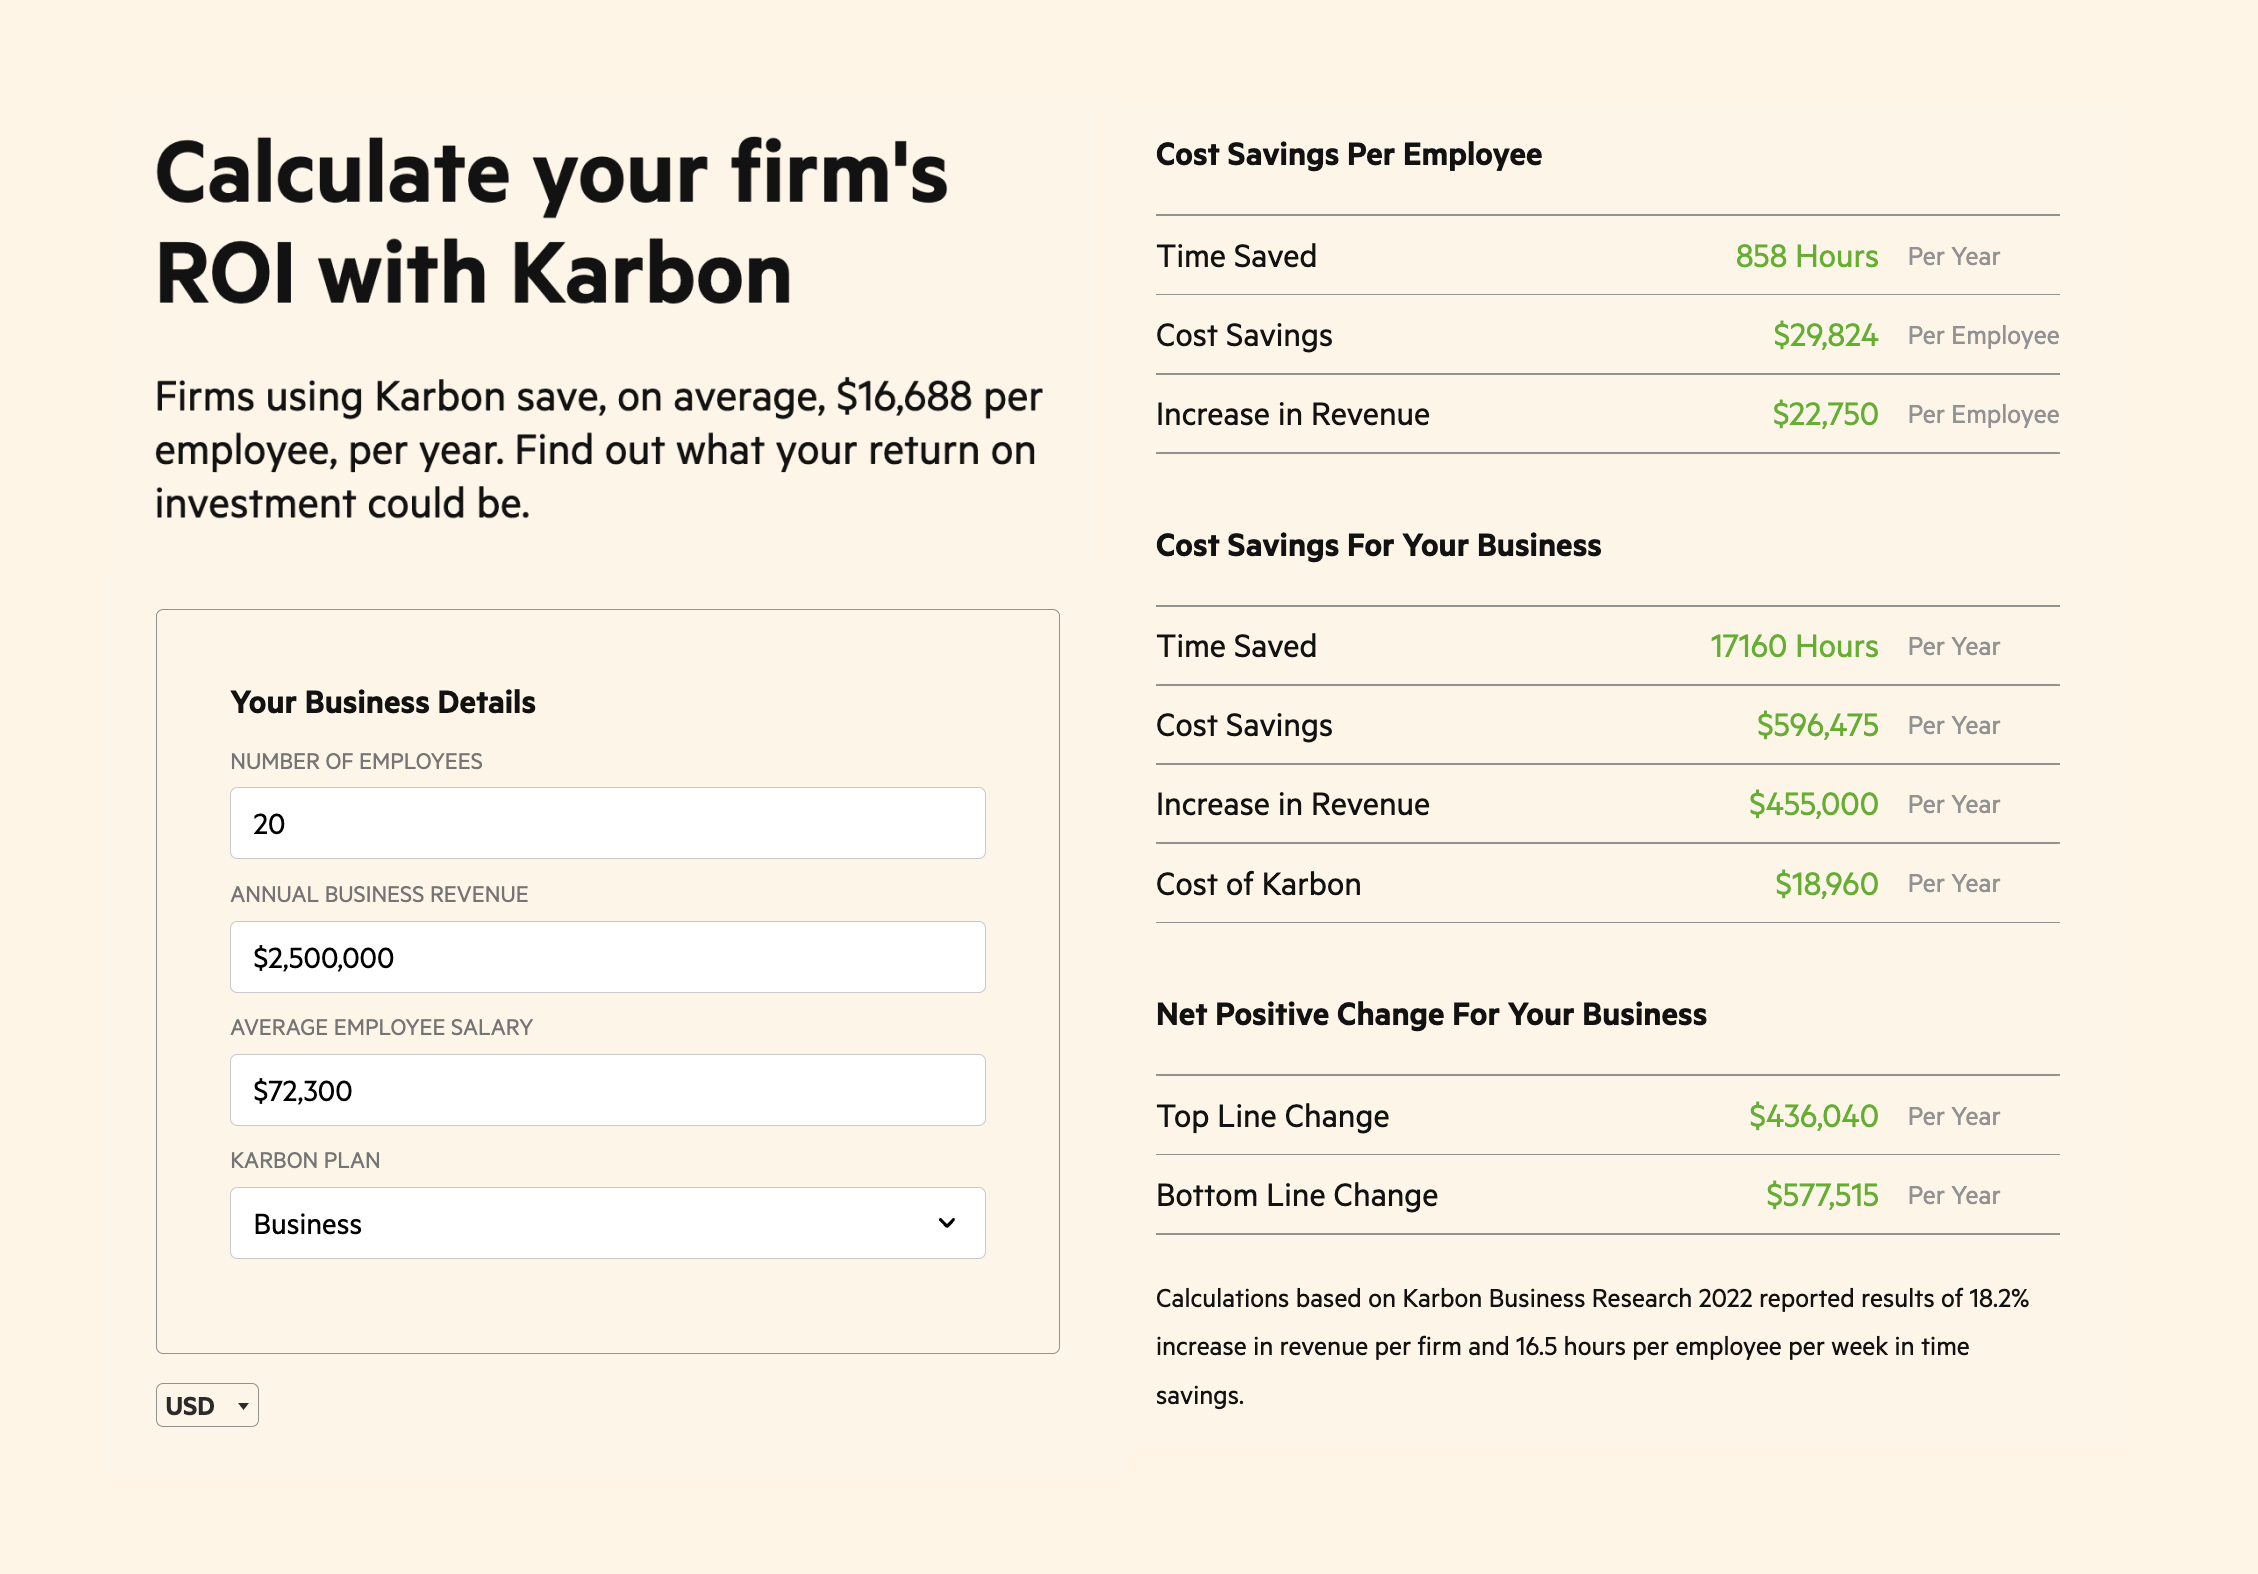 Karbon's ROI calculator explaining that for a firm with 20 employees using Karbon, they would save: 858 hours per year per employee, $29,824 USD per employee, and increase revenue by $455,000 USD per year.